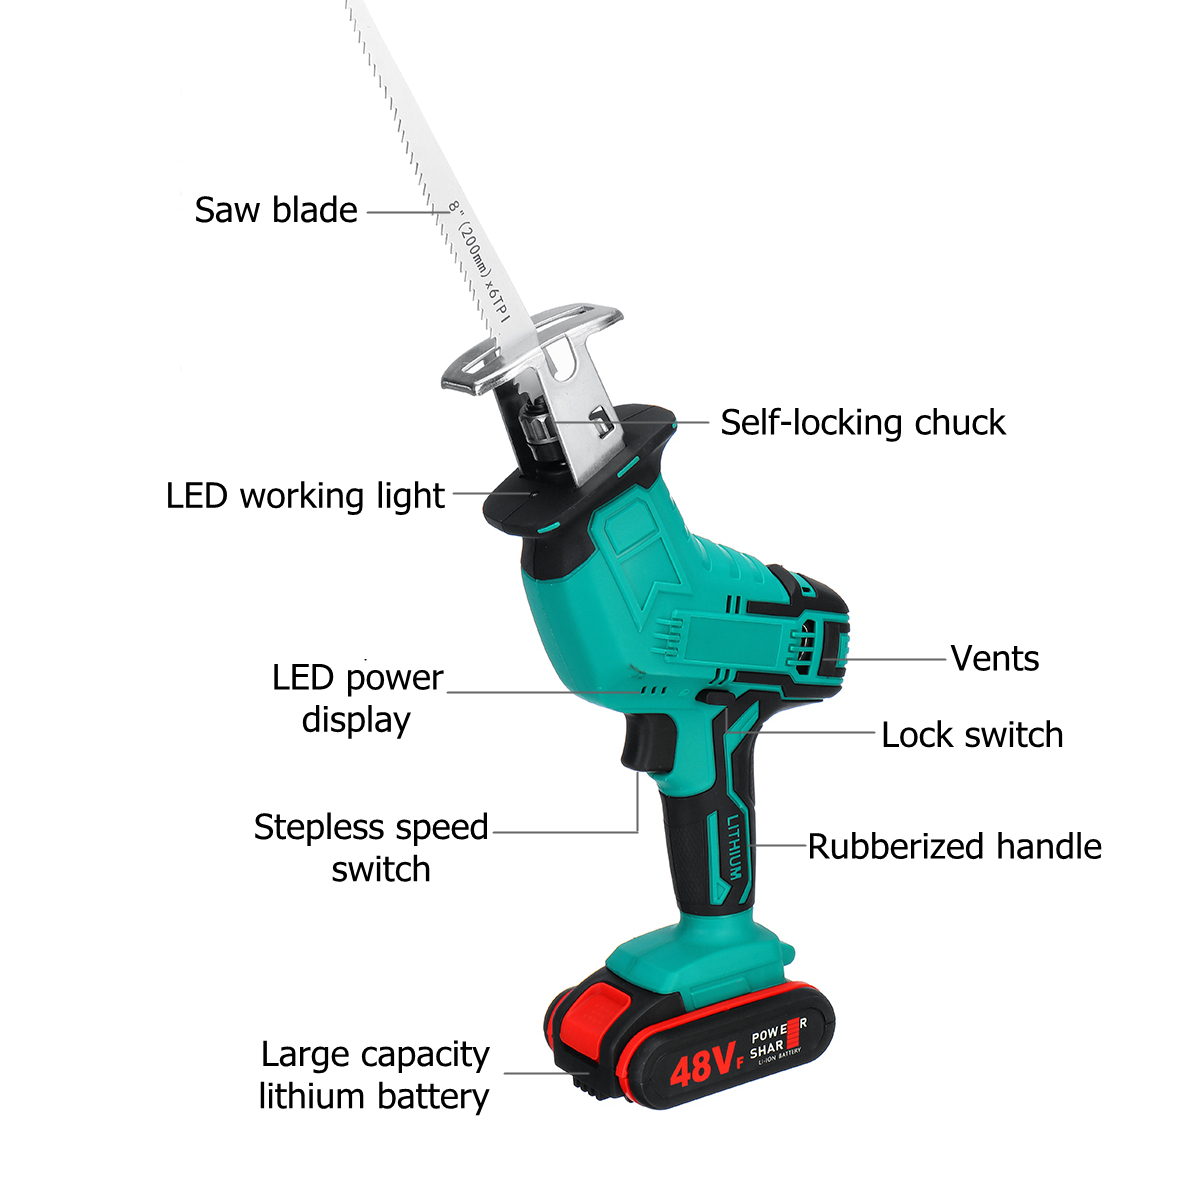 48V-Cordless-Reciprocating-Saw-With-Battery-Charger-recip-Sabre-Saw-New-Power-Tool-1734472-10